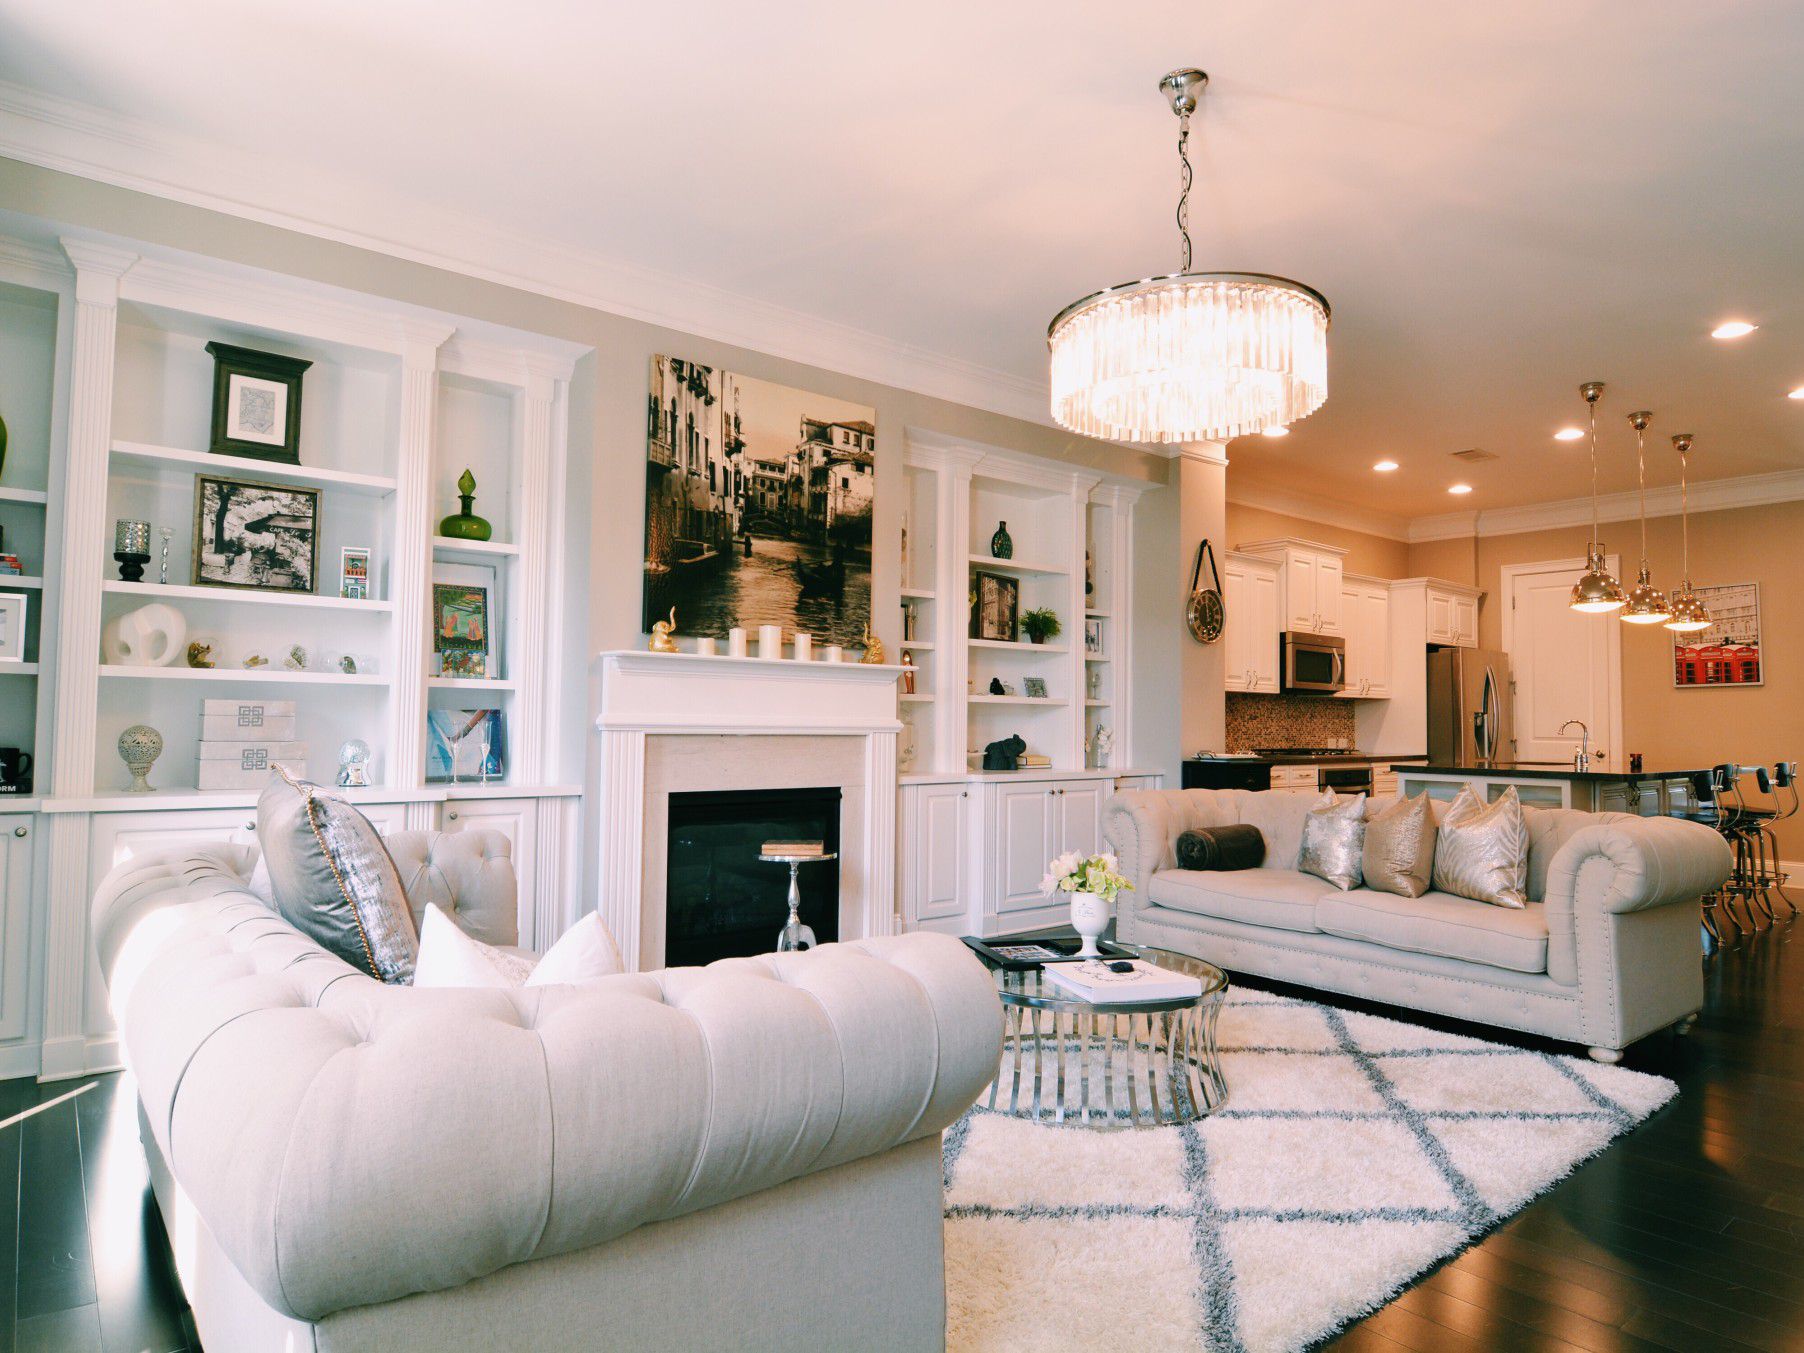 The Top 7 Benefits of Bespoke Furniture for Your Home » Residence Style